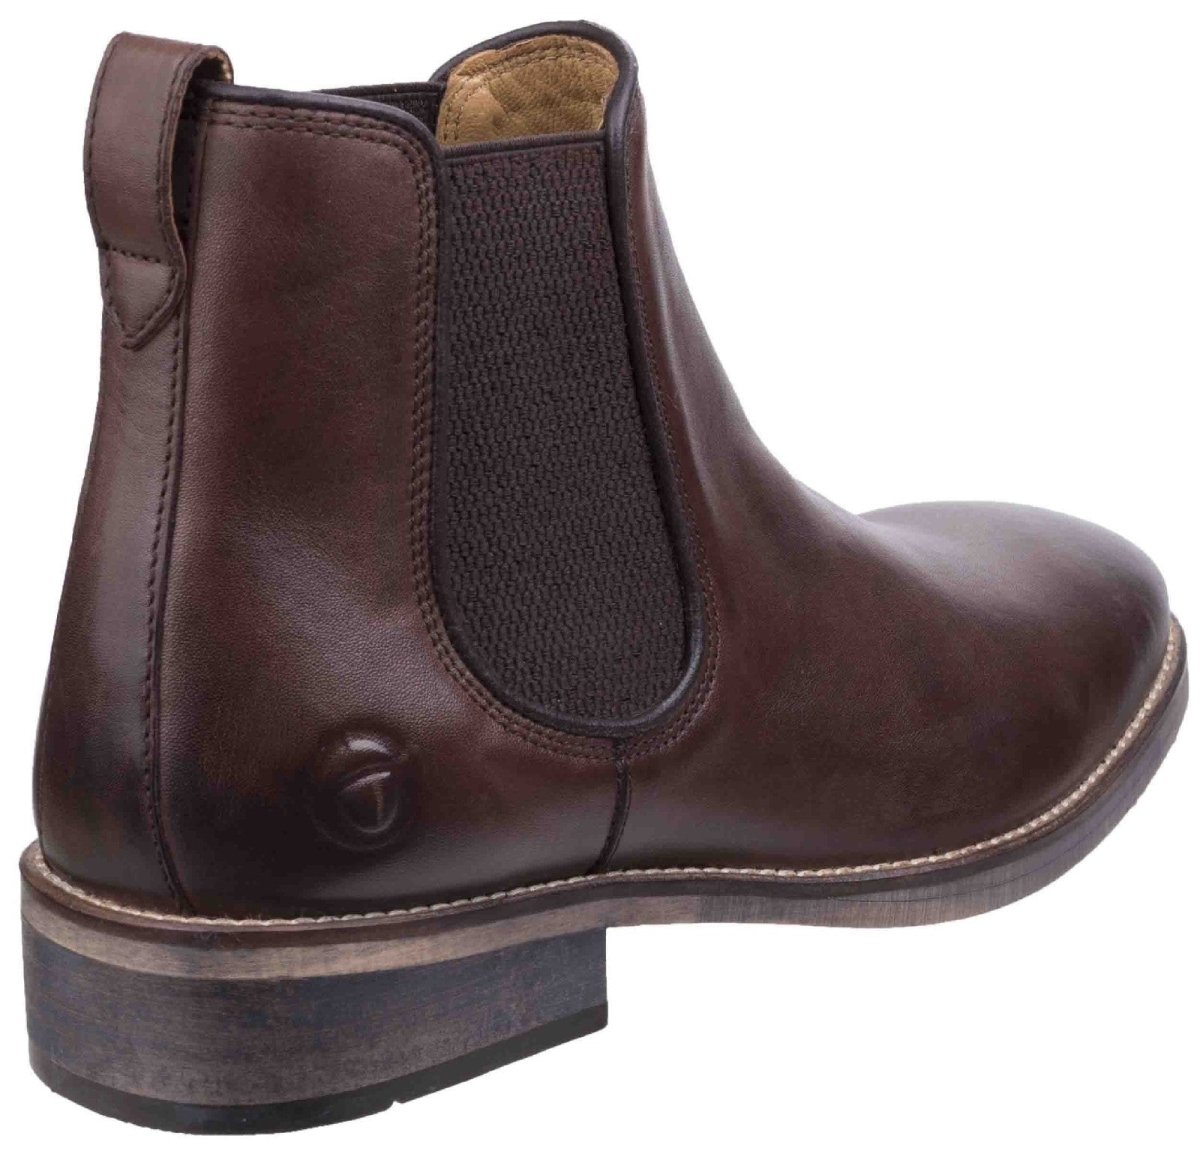 Cotswold Corsham Mens Country Dealer Boots - Shoe Store Direct